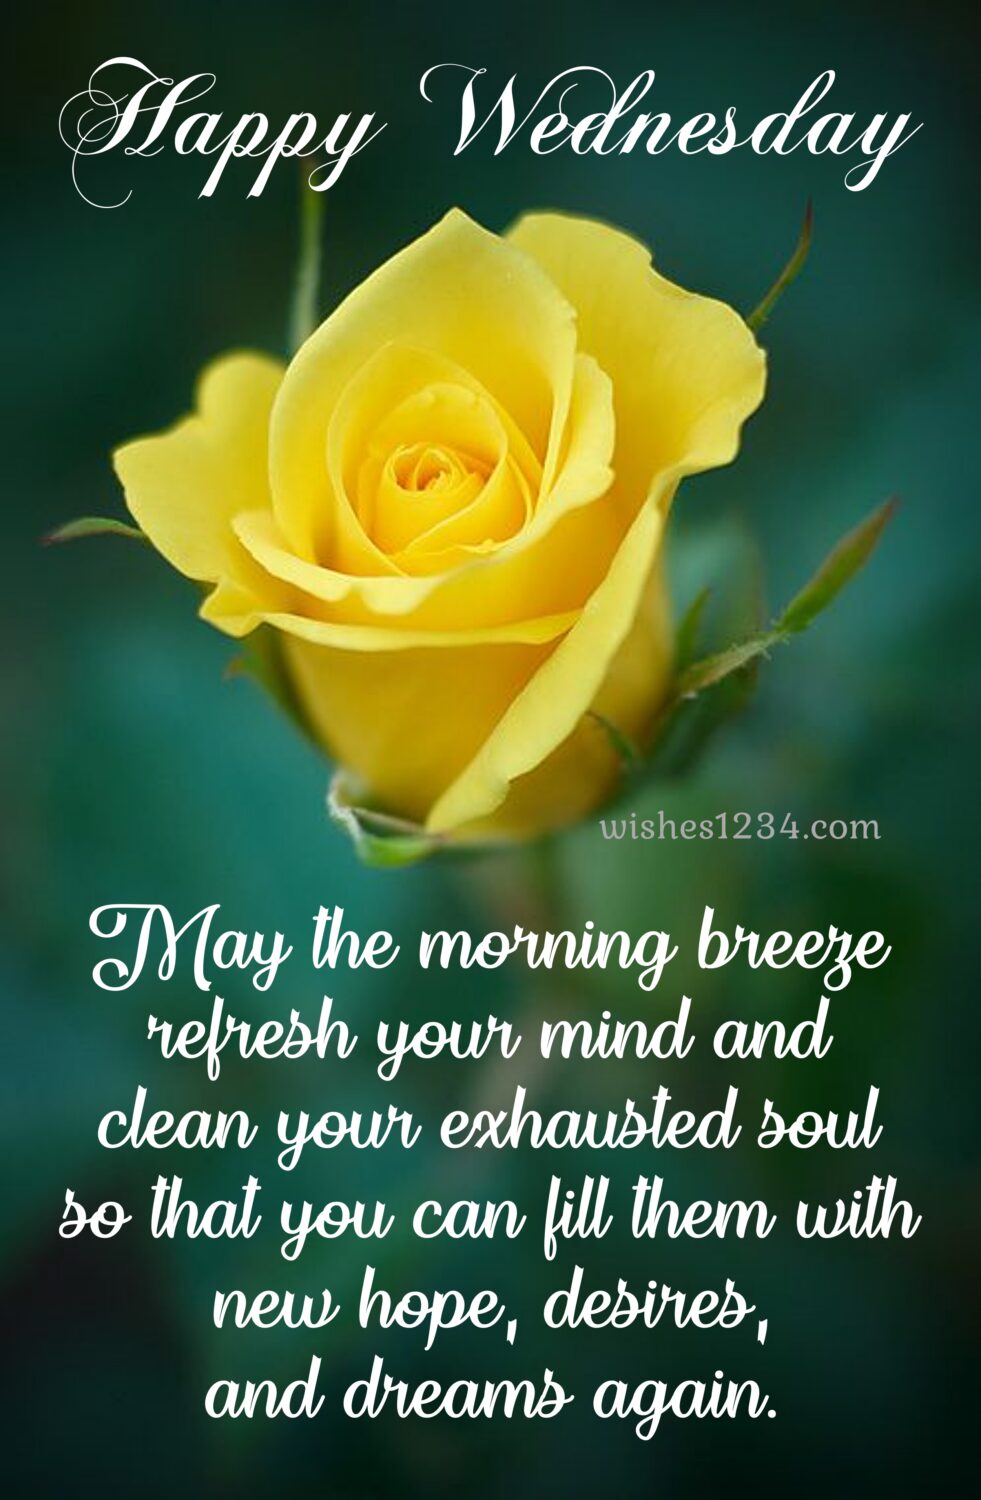 Yellow rose with wednesday quotes, Happy Wednesday.